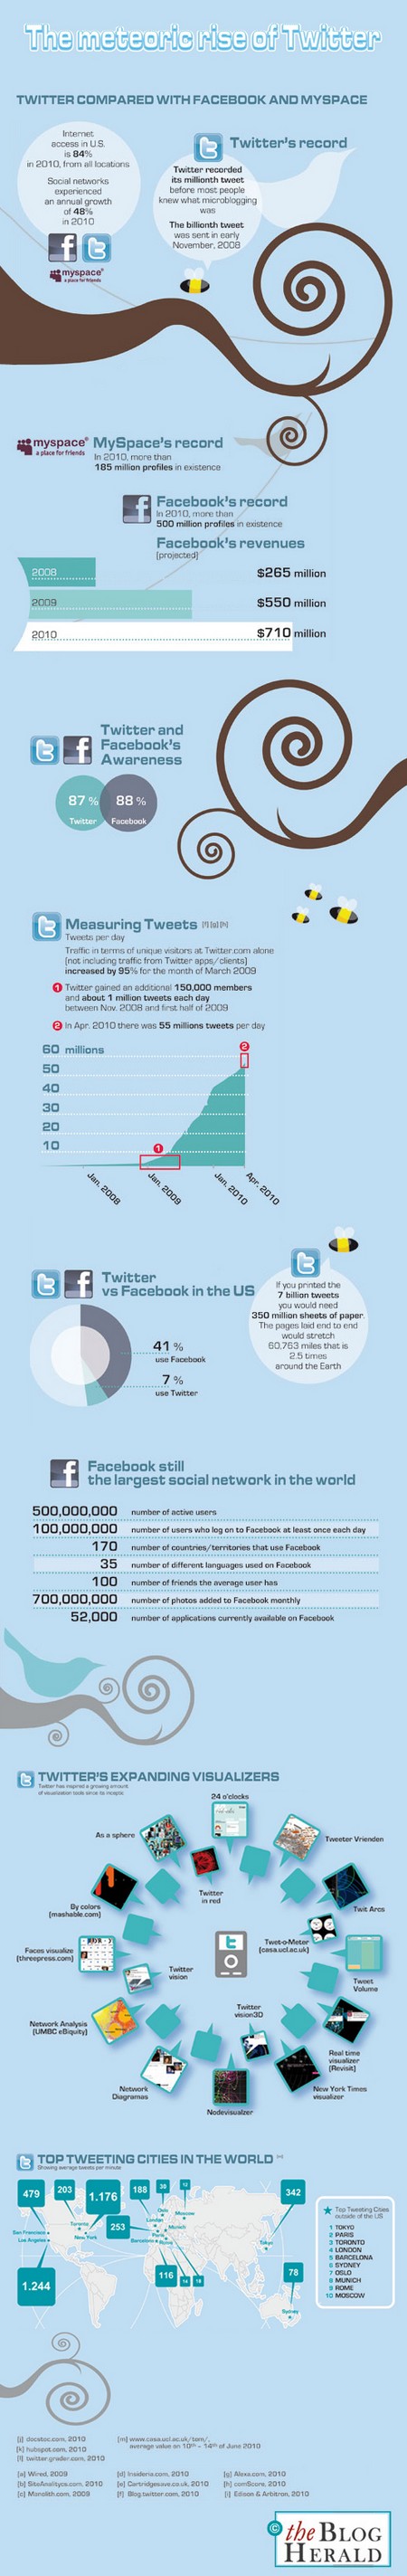 infographie-Twitter